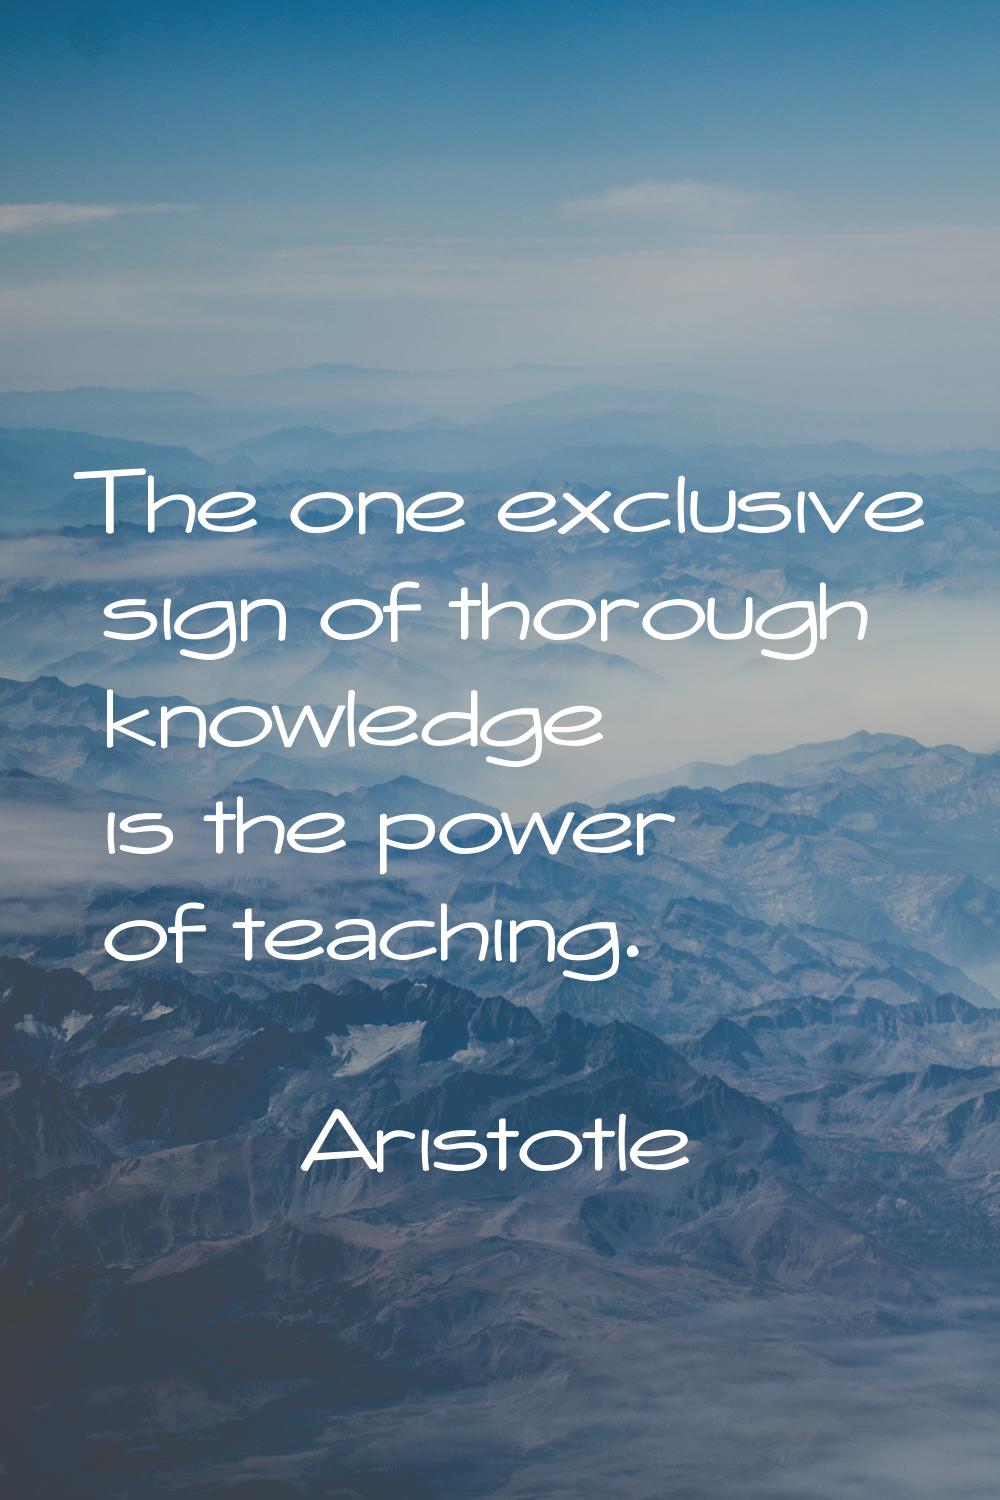 The one exclusive sign of thorough knowledge is the power of teaching.